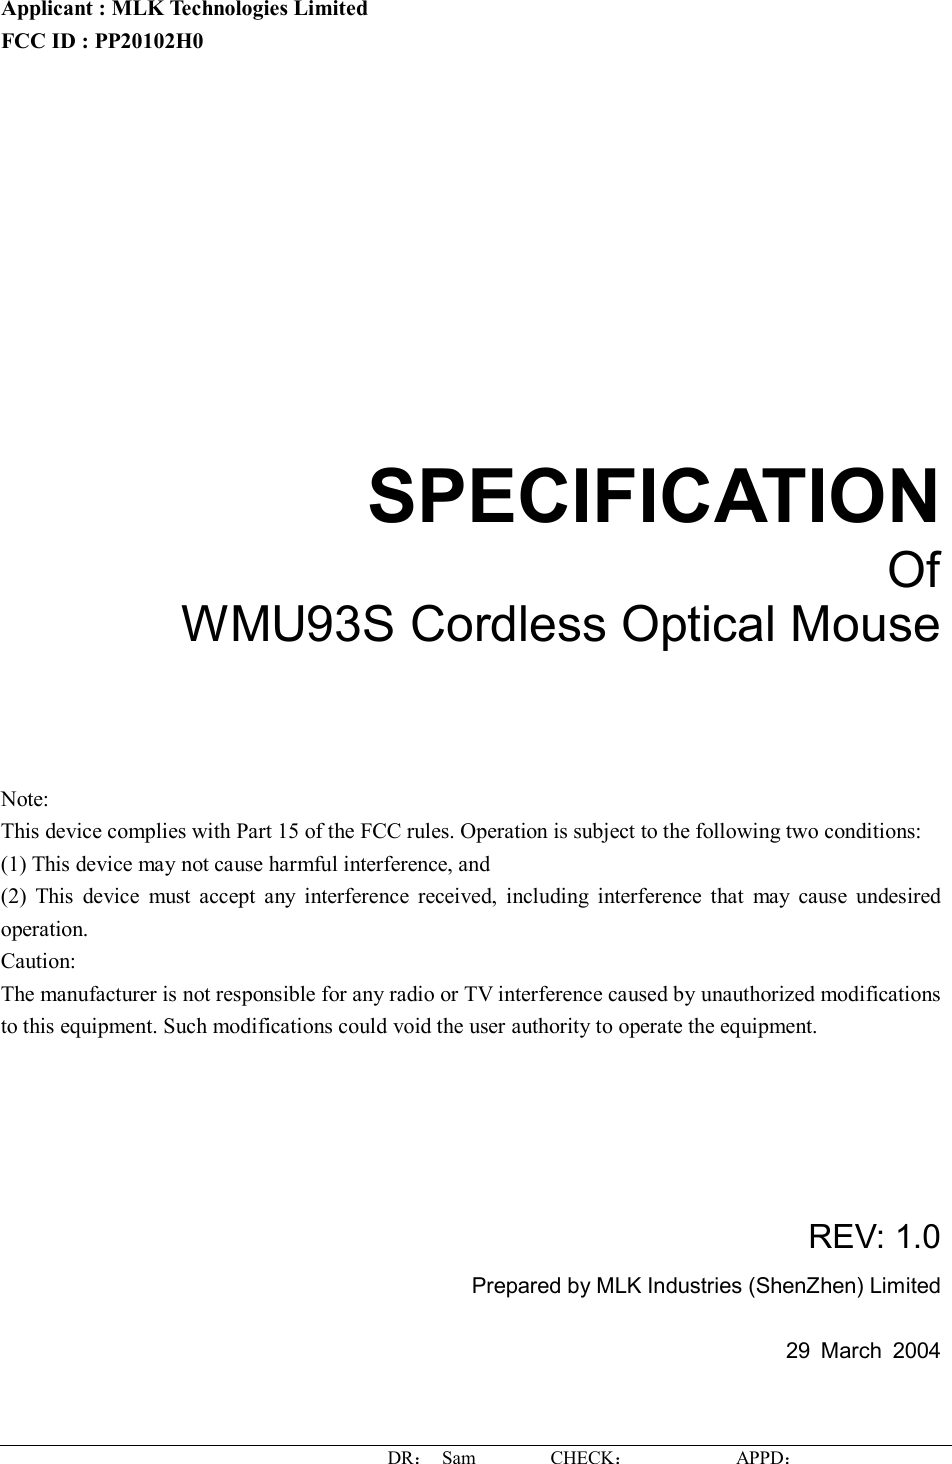 DR： Sam        CHECK：           APPD：                   Applicant : MLK Technologies Limited FCC ID : PP20102H0       SPECIFICATION Of WMU93S Cordless Optical Mouse     Note: This device complies with Part 15 of the FCC rules. Operation is subject to the following two conditions: (1) This device may not cause harmful interference, and (2) This device must accept any interference received, including interference that may cause undesired operation.  Caution: The manufacturer is not responsible for any radio or TV interference caused by unauthorized modifications to this equipment. Such modifications could void the user authority to operate the equipment.      REV: 1.0 Prepared by MLK Industries (ShenZhen) Limited  29 March 2004   